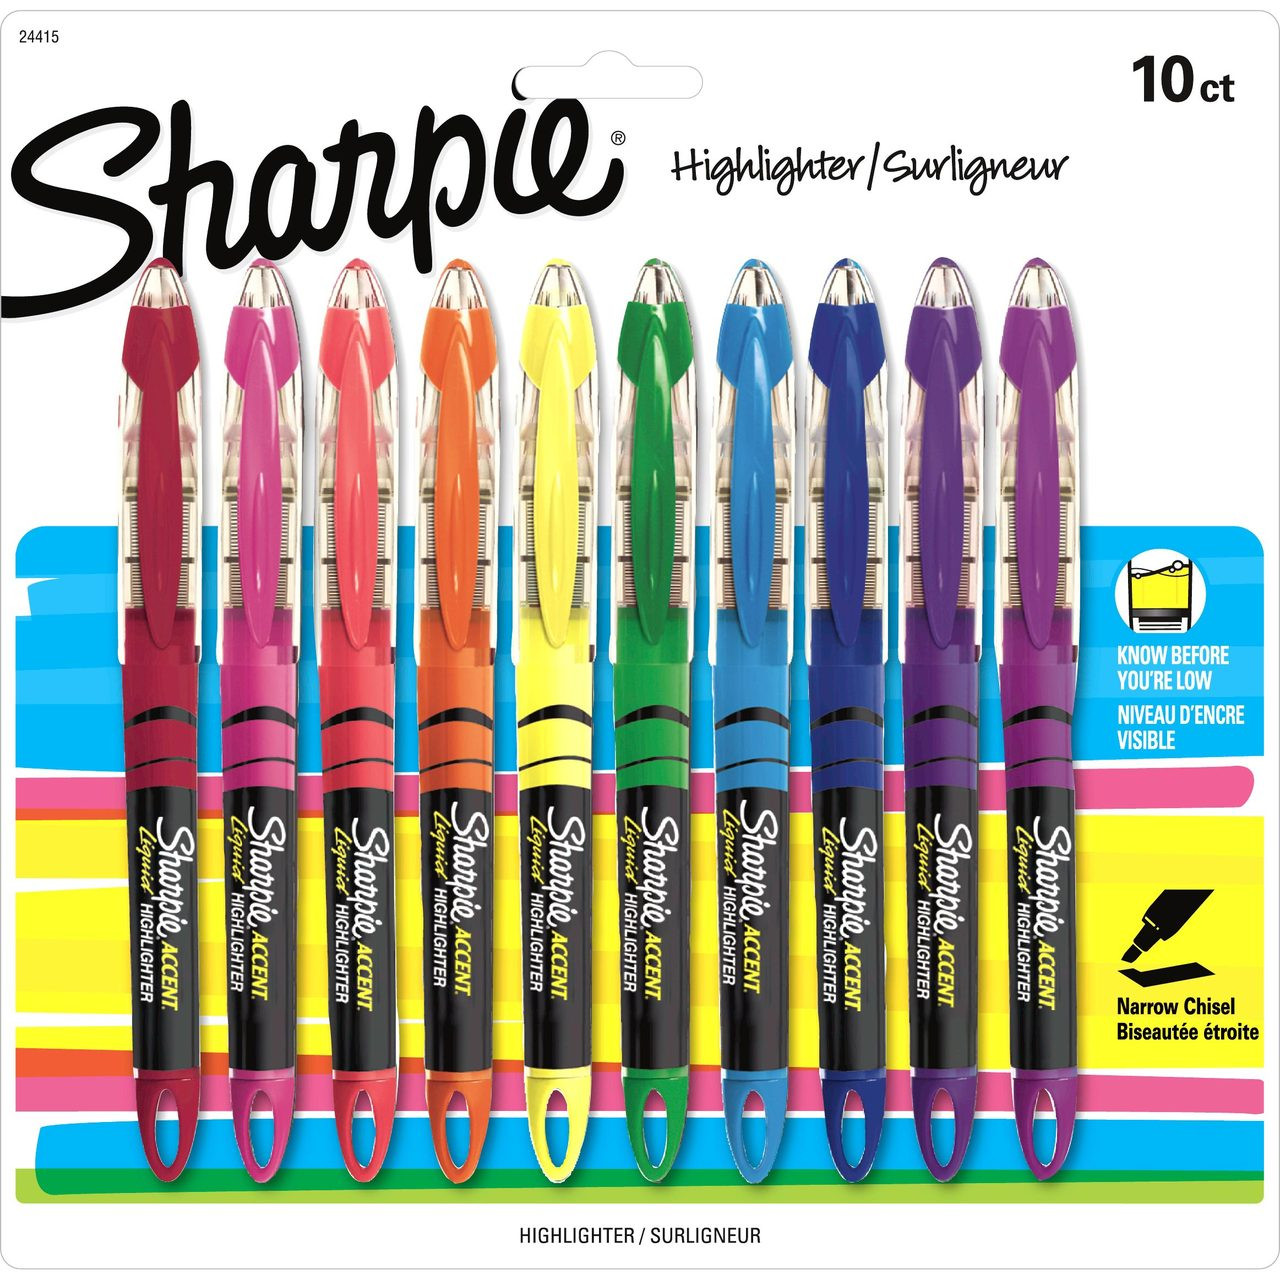 Sharpie: Permanent Markers, Highlighters, Pens, & More